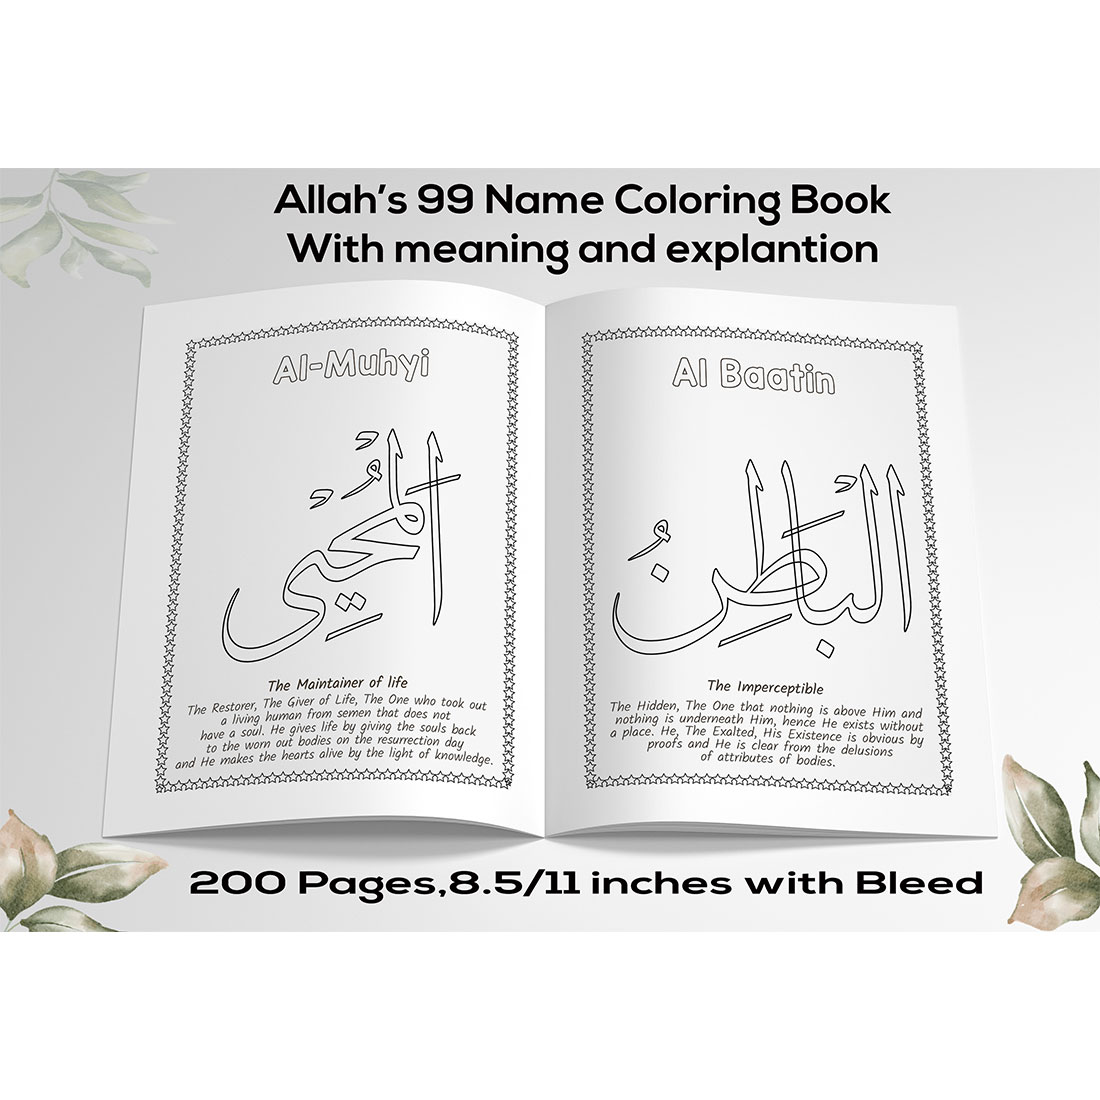 Allah's 99 Name Colouring Book with Meaning preview image.